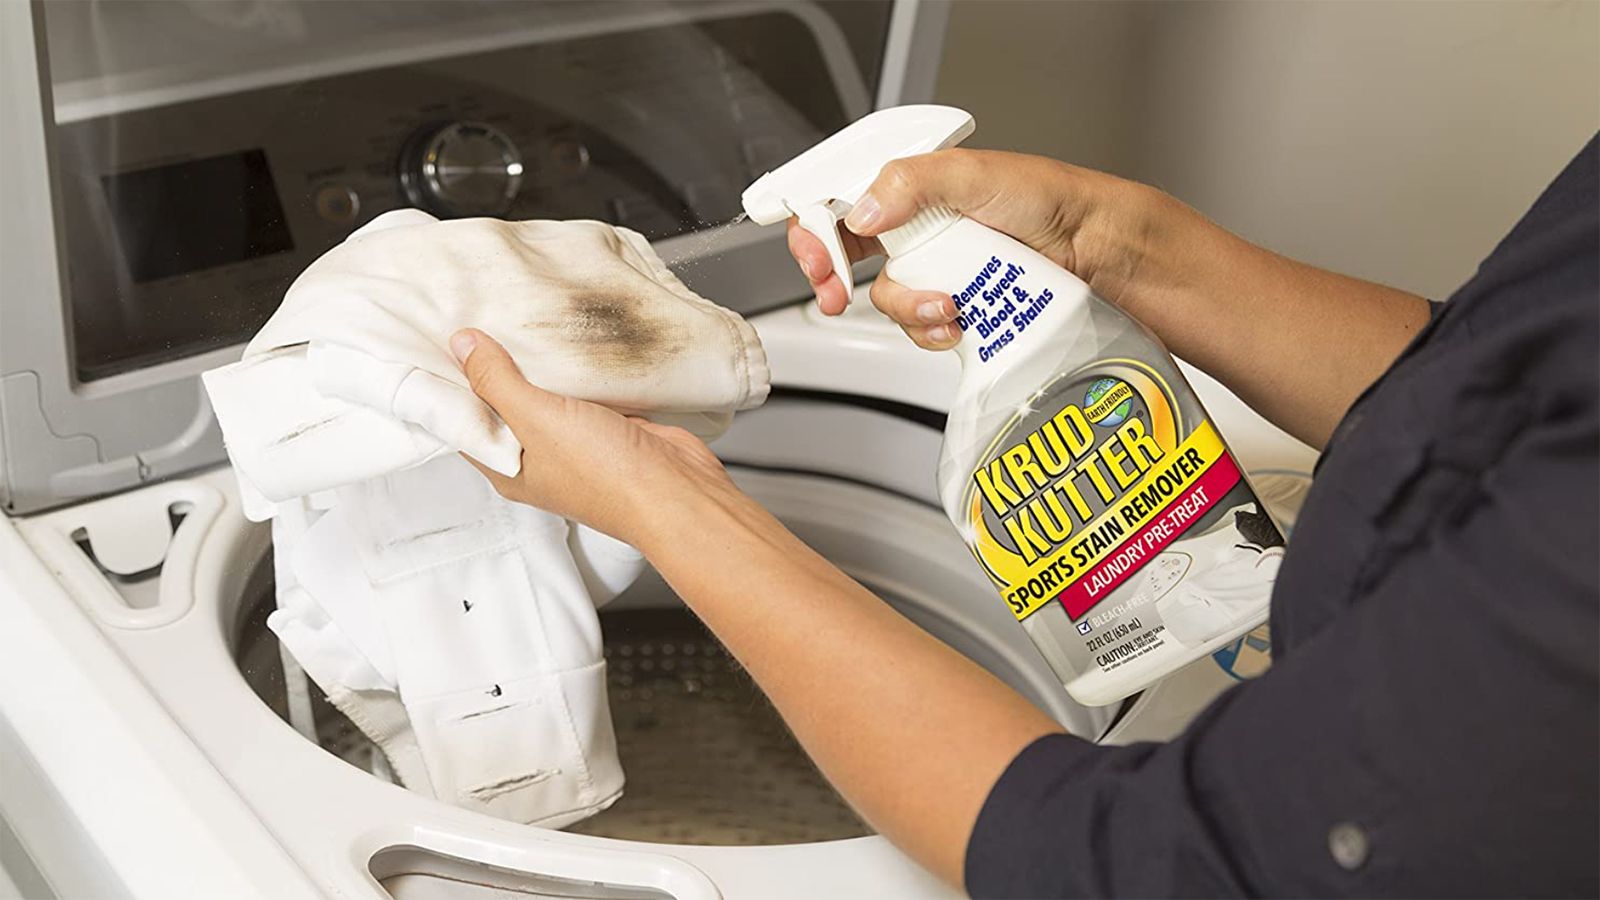 14 best stain removers for clothes, carpets and mattresses